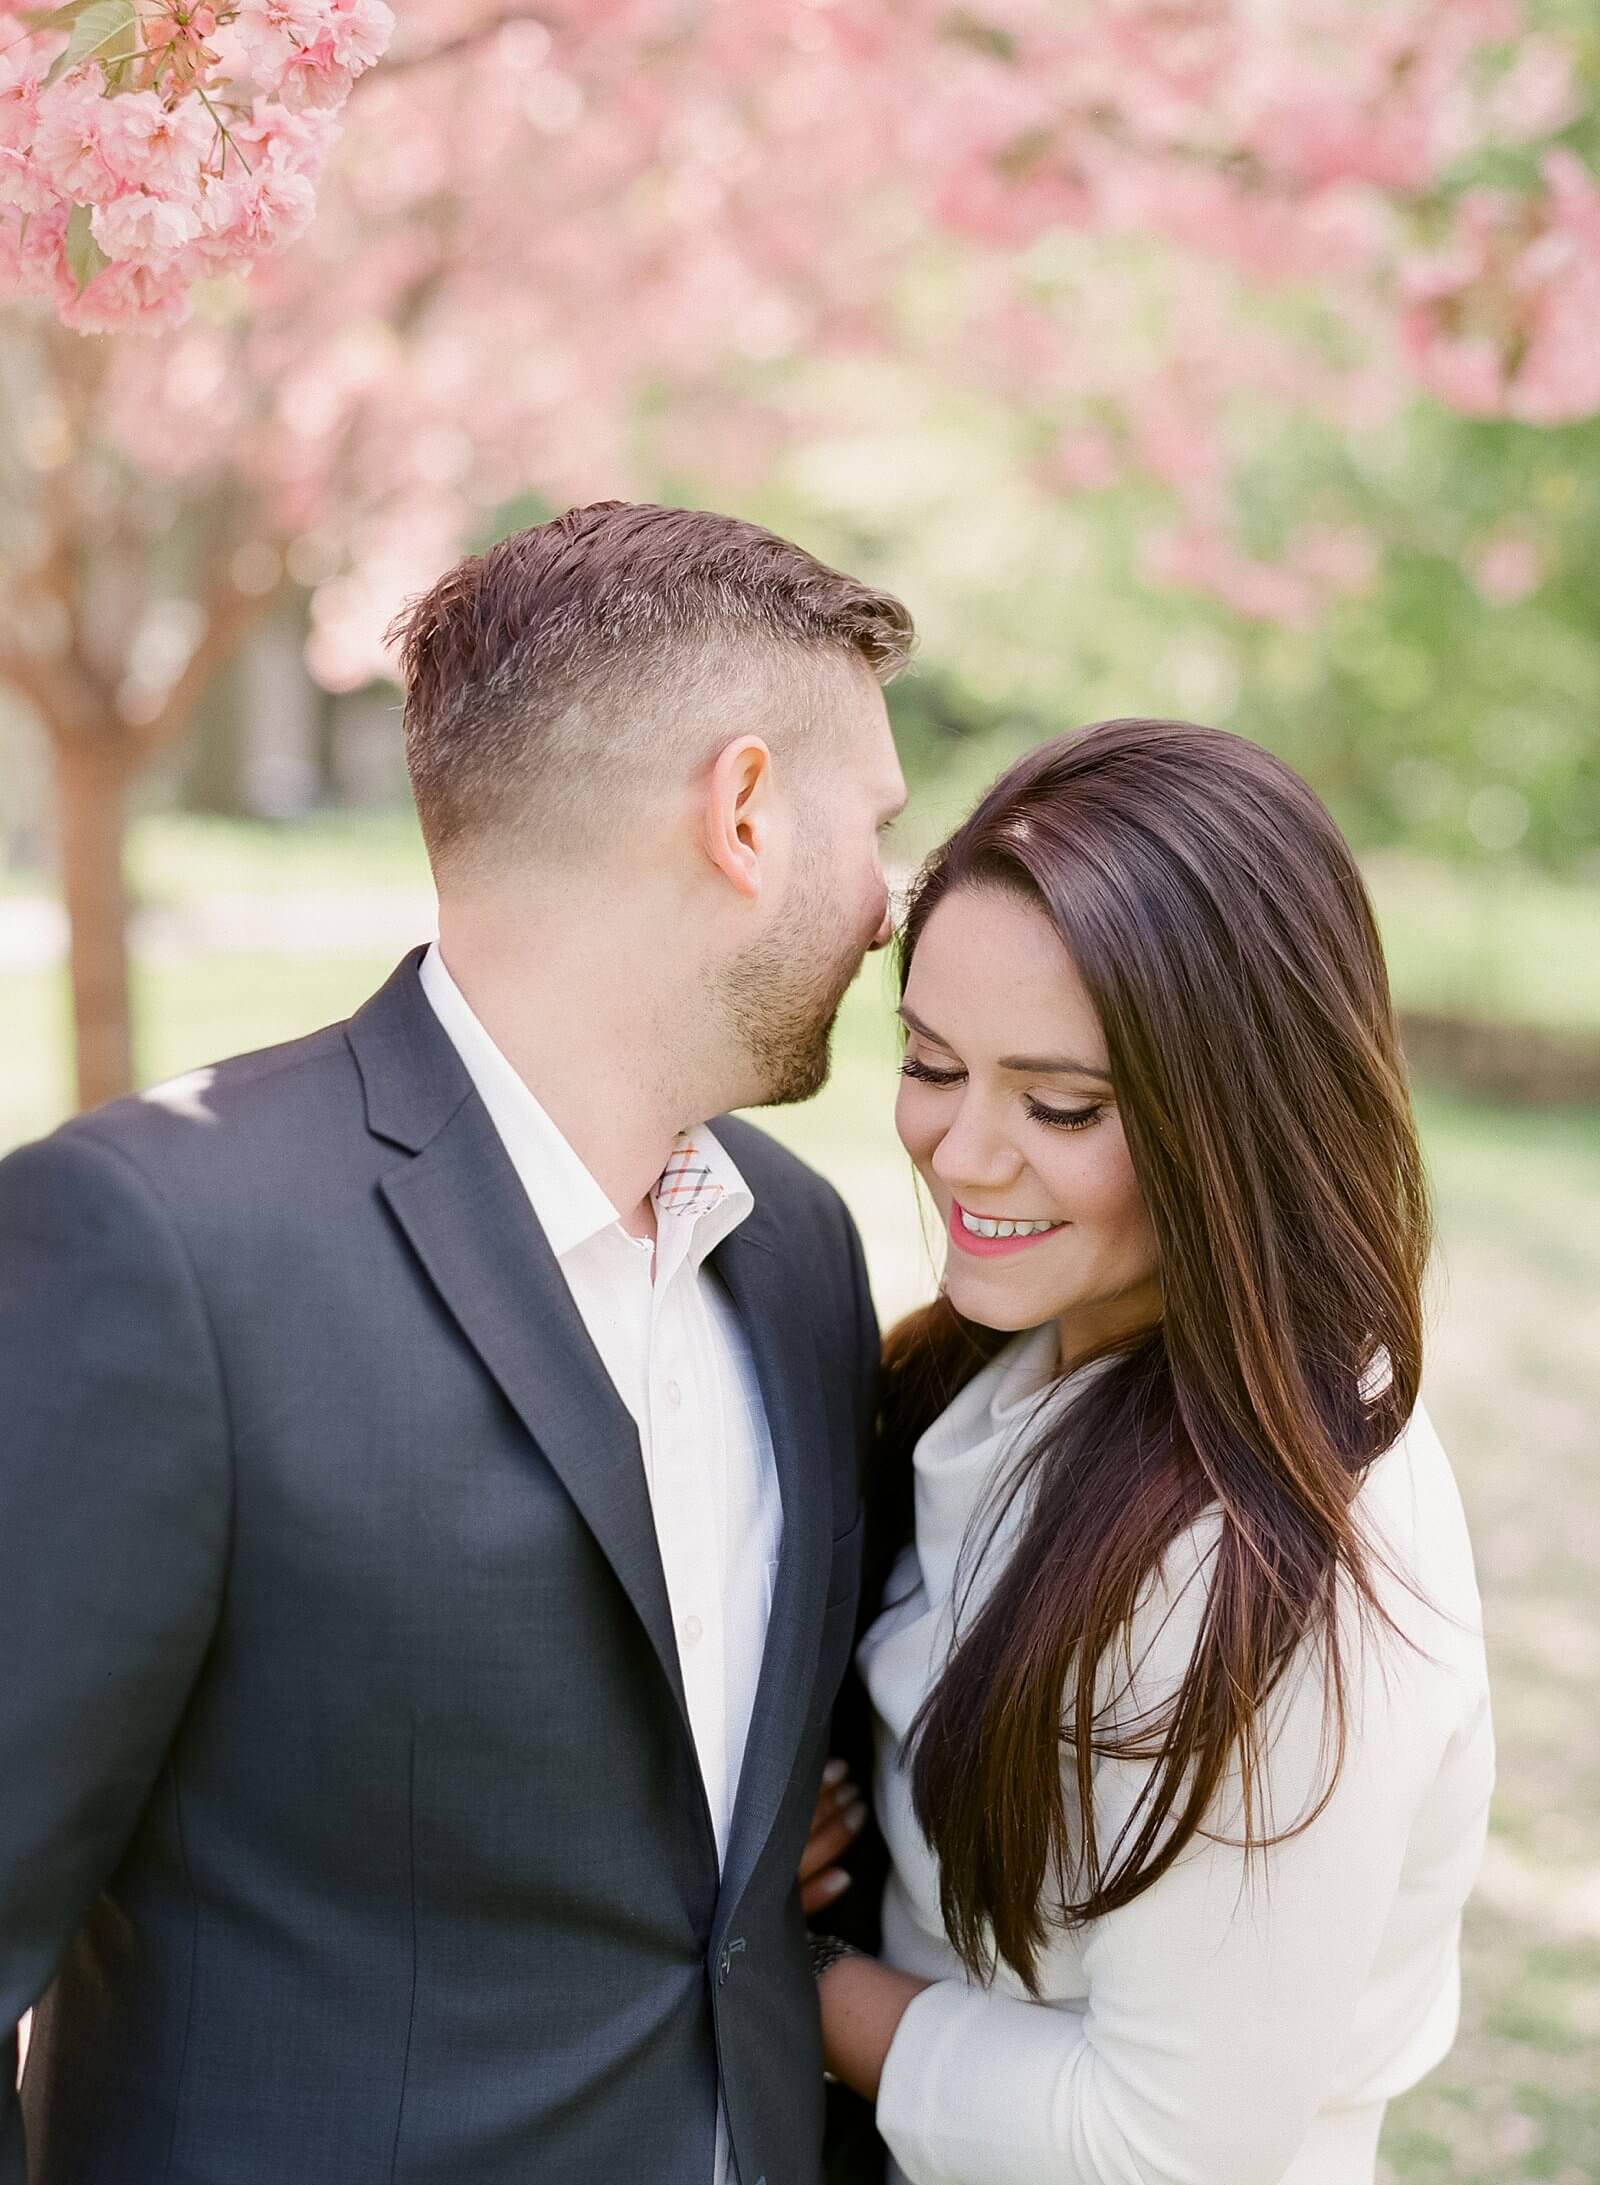 A couple under the cherry blossoms during their engagement session in Central Park in Manhattan.